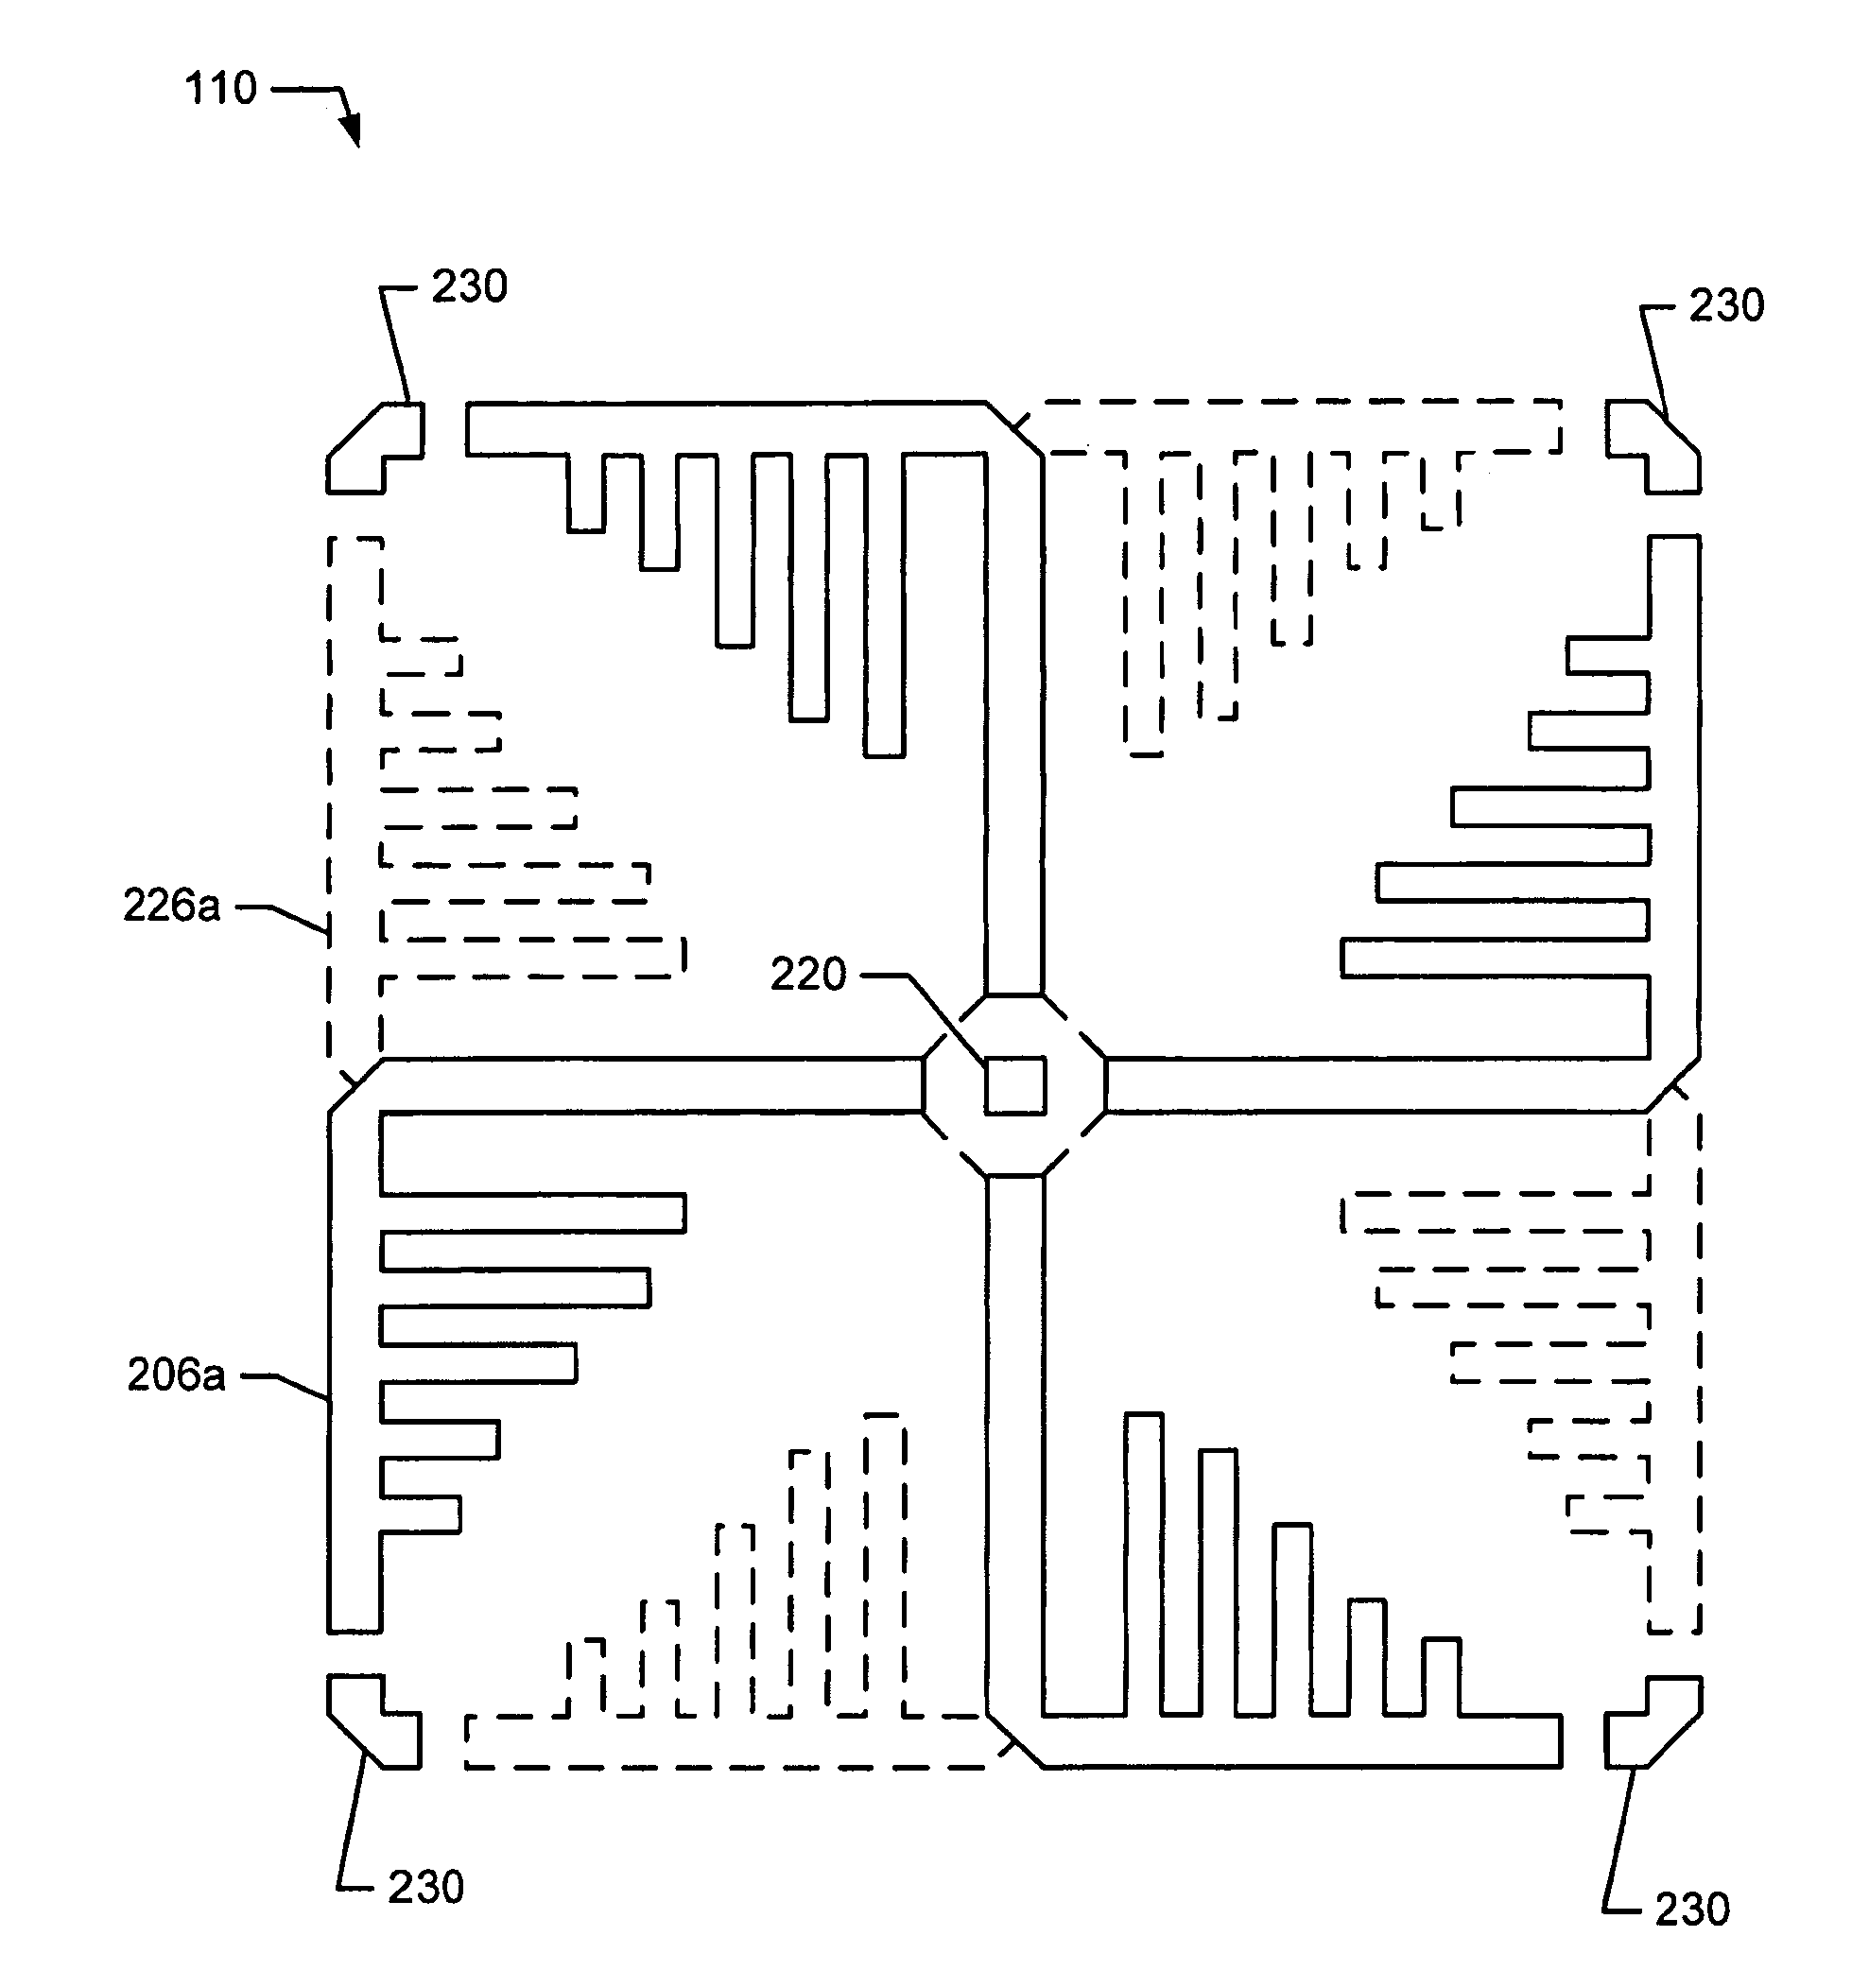 System and method for a minimized antenna apparatus with selectable elements